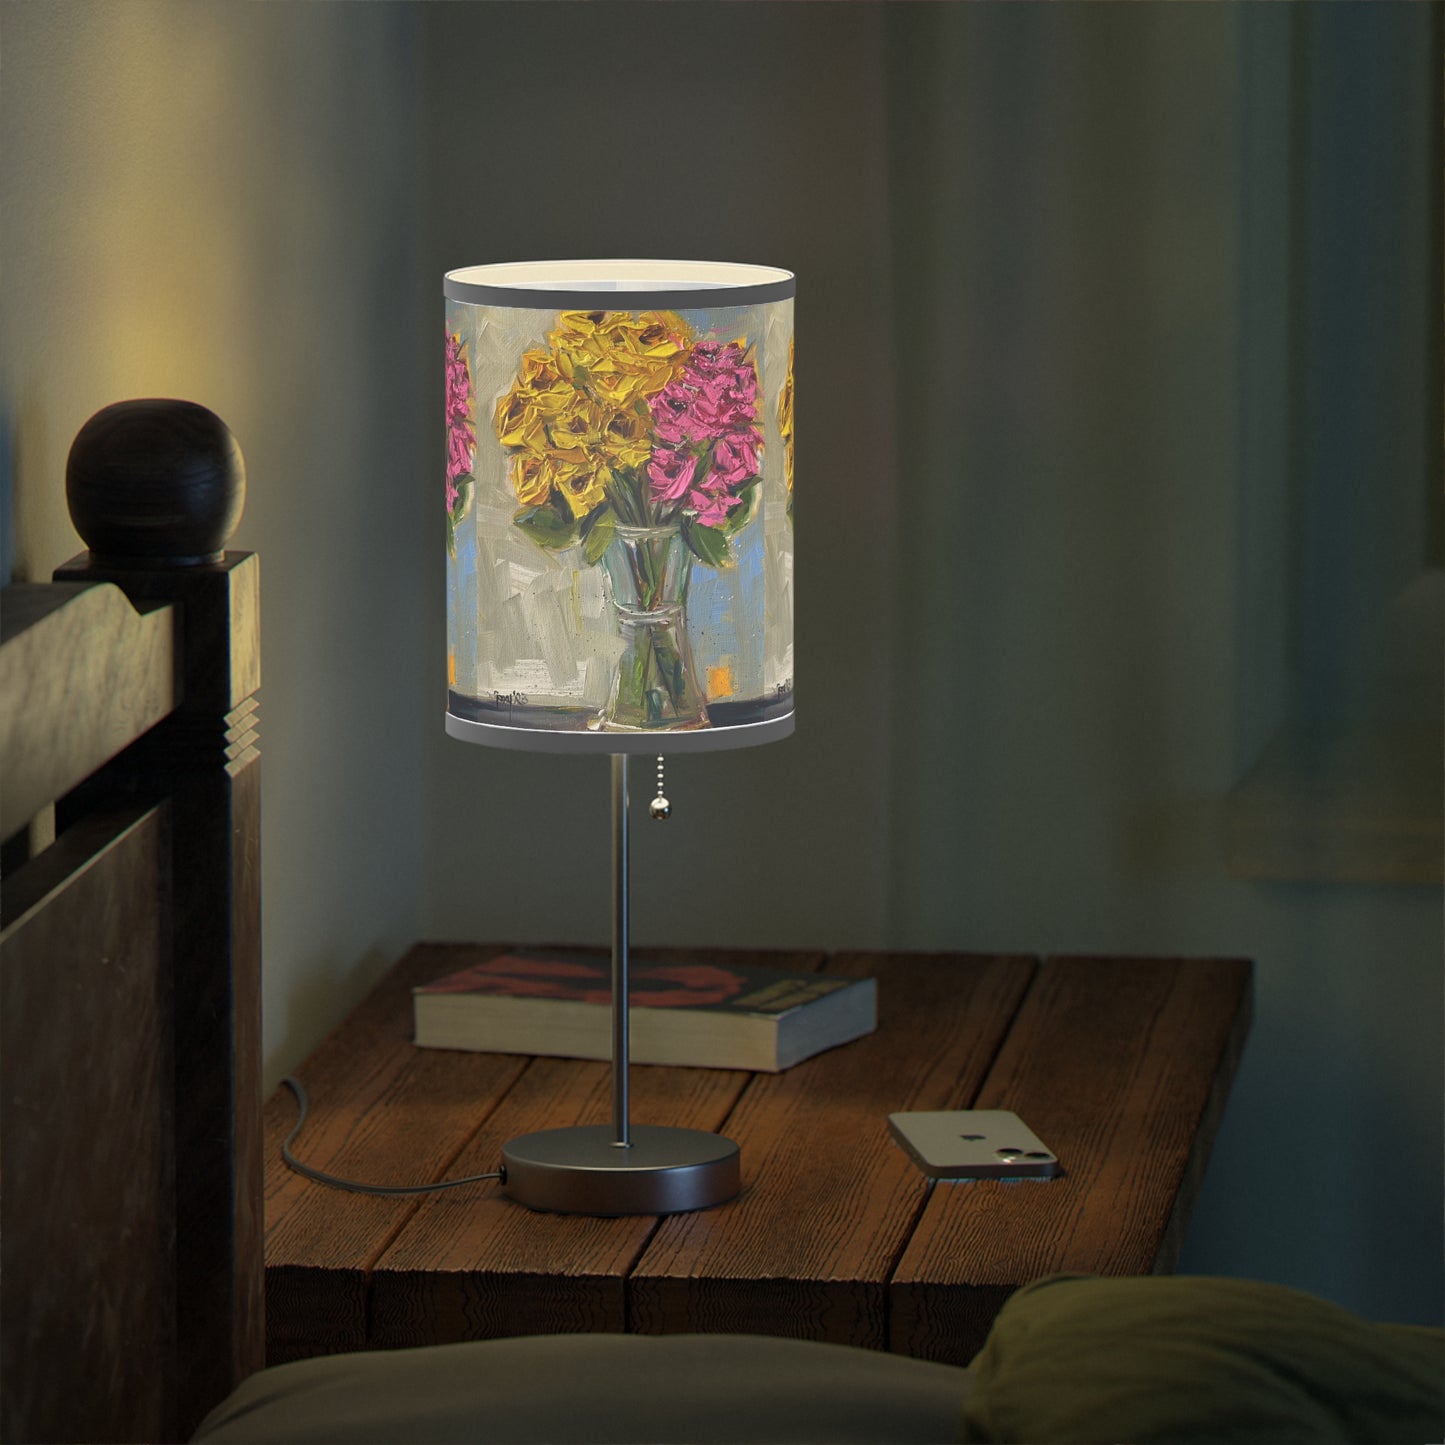 Pink and Yellow Roses Lamp on a Stand, US|CA plug